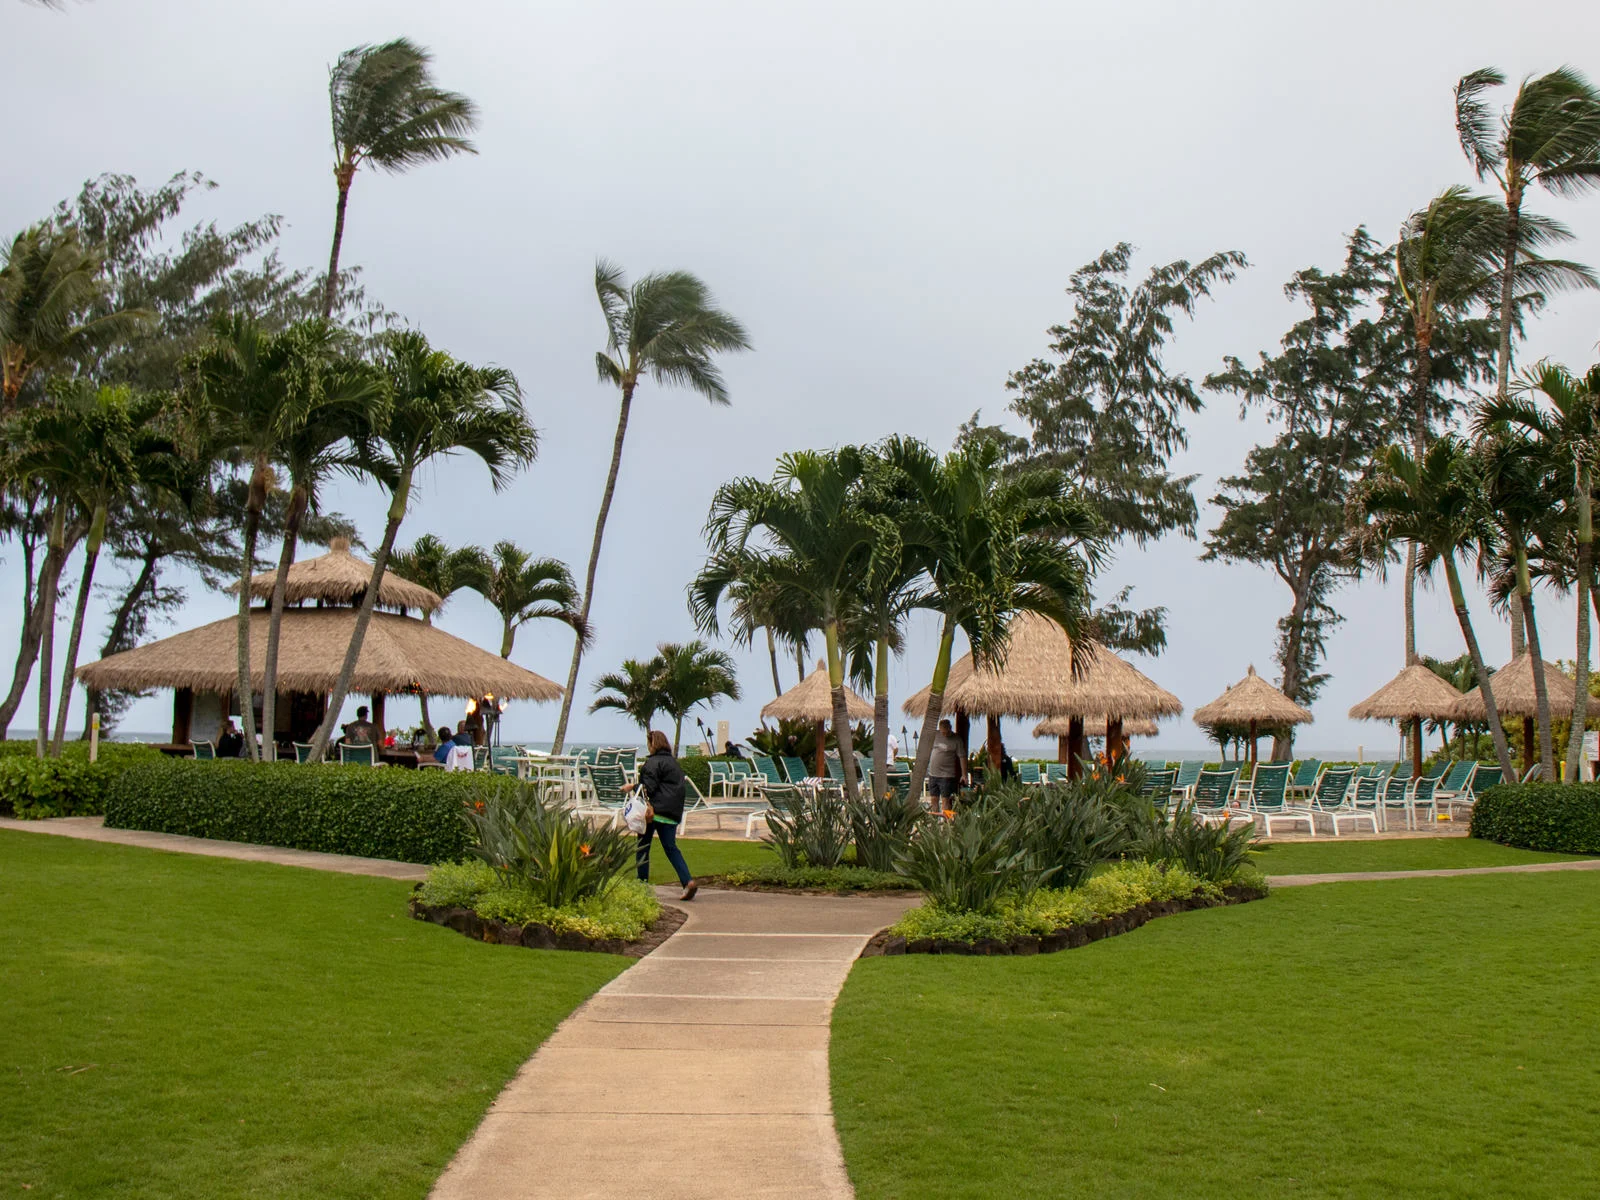 Tiki huts and sun beds encircling the pool at Aston Islander On The Beach, one of the best hotels in Kauai